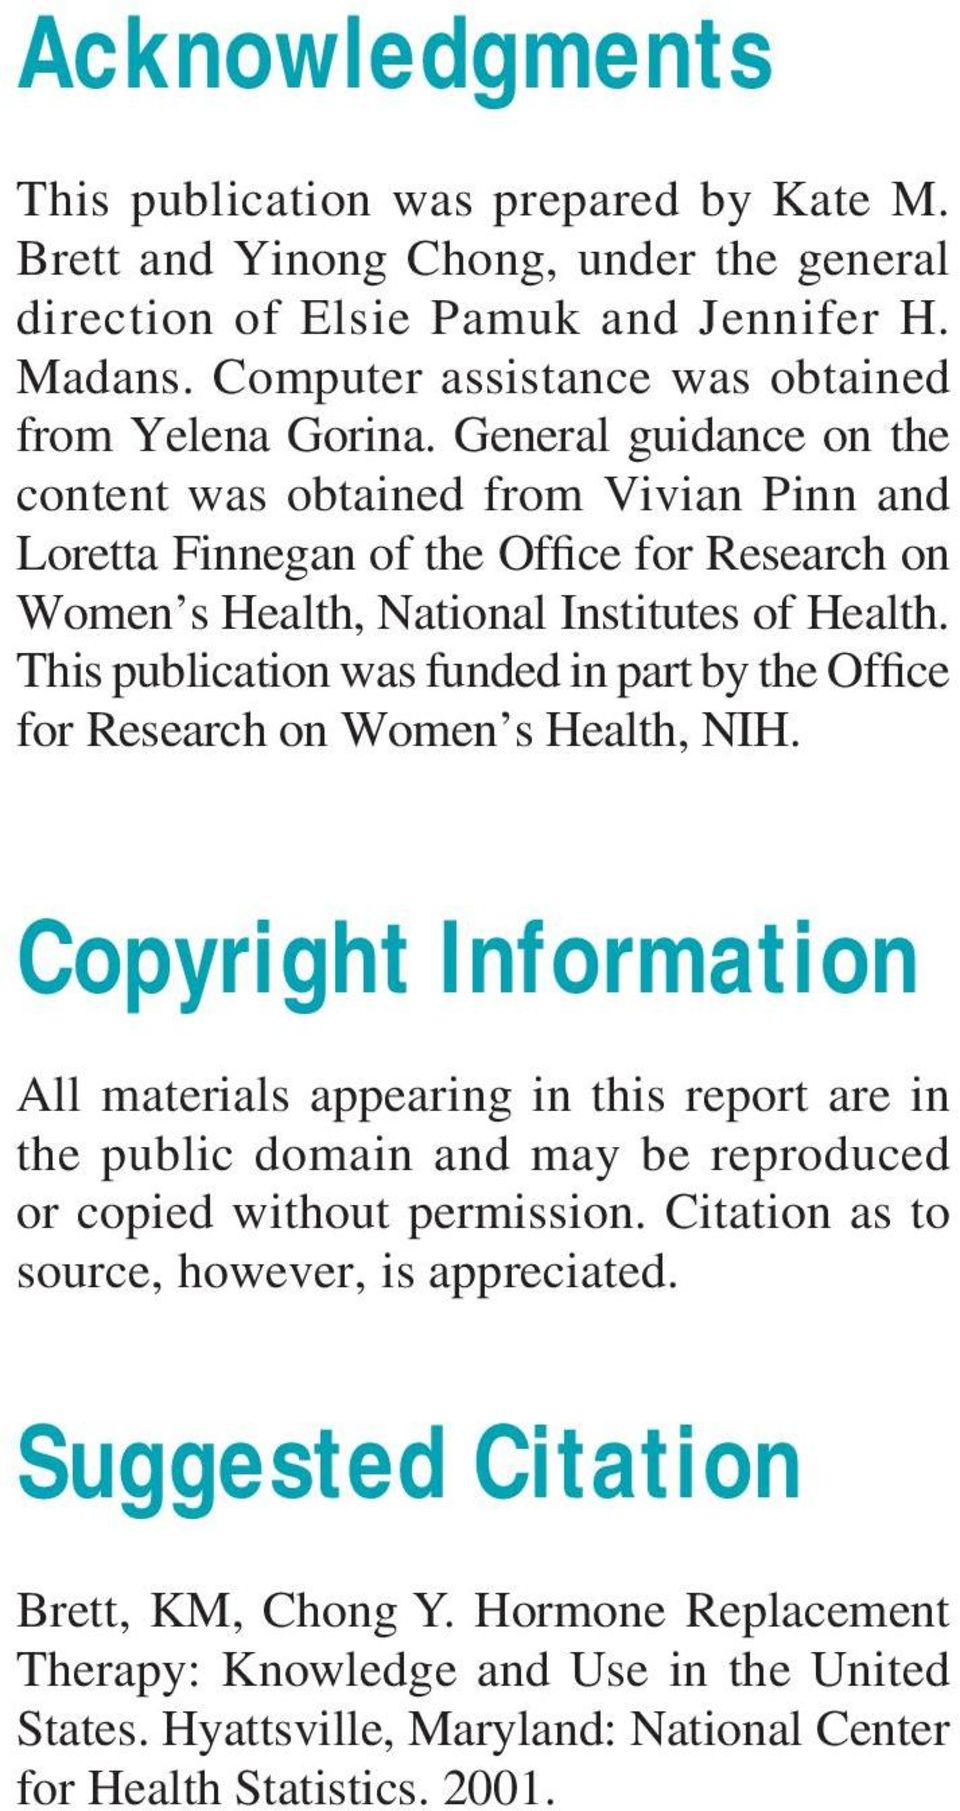 This publication was funded in part by the Office for Research on Women s Health, NIH.